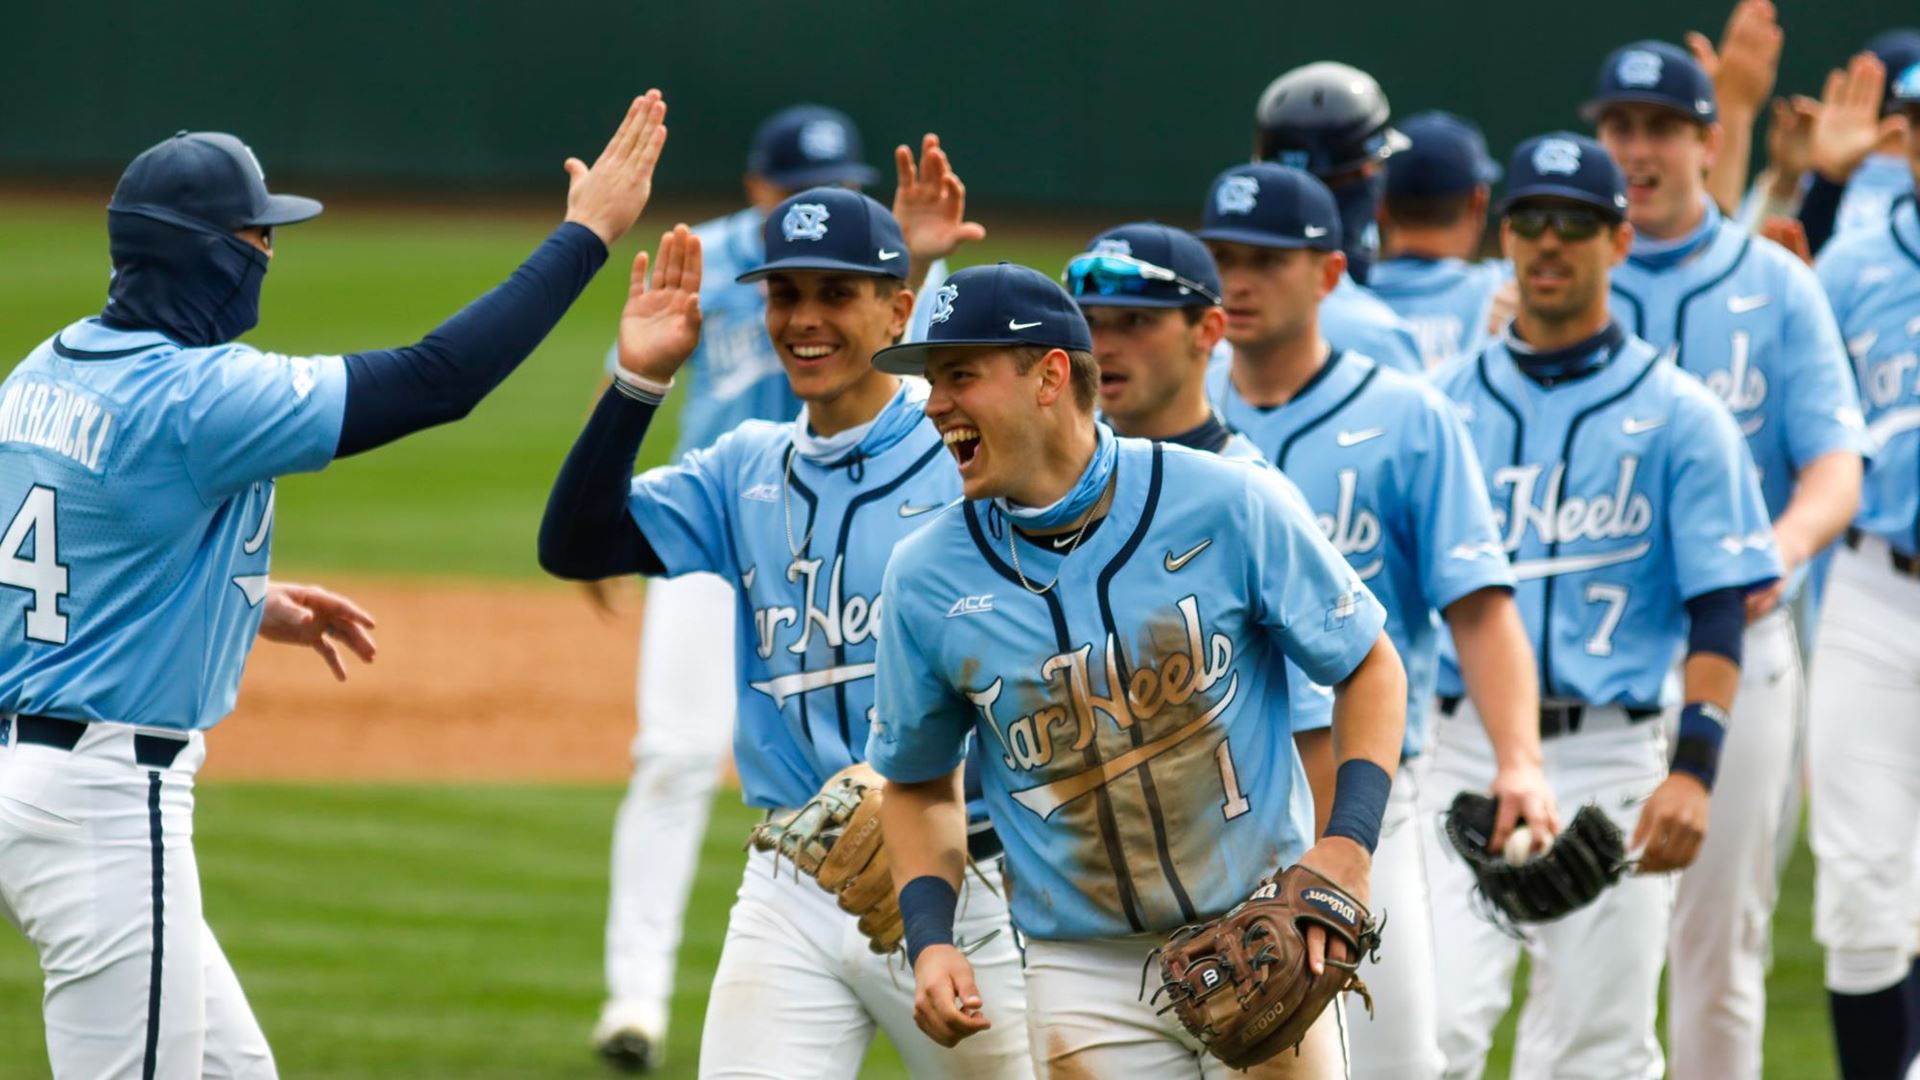 UNC Baseball gets swept at home by Boston College